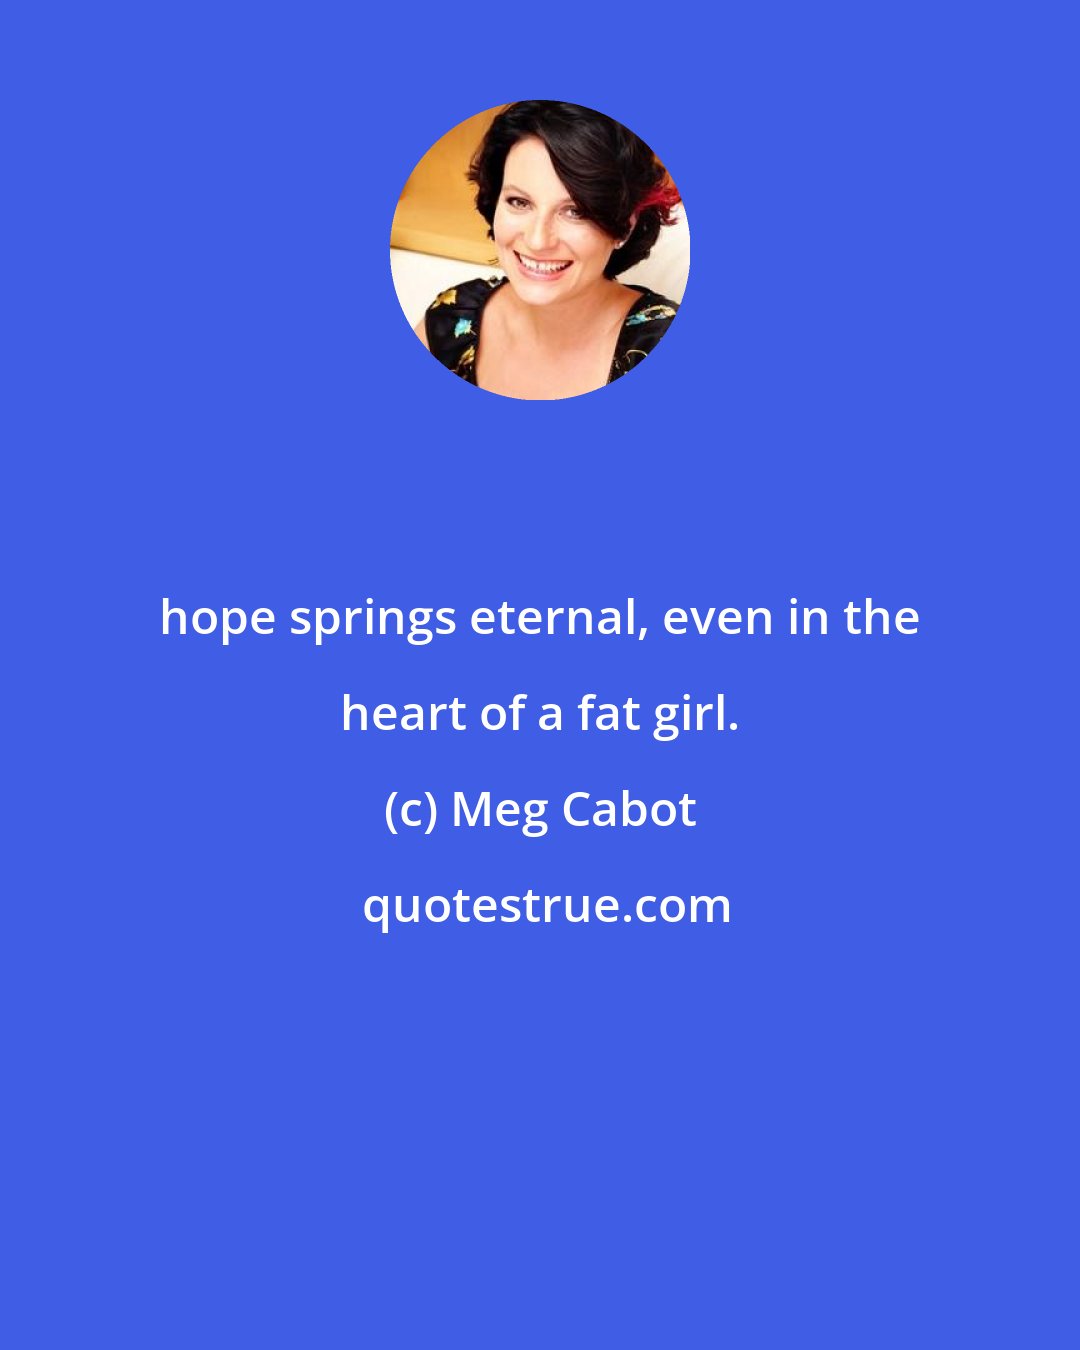 Meg Cabot: hope springs eternal, even in the heart of a fat girl.